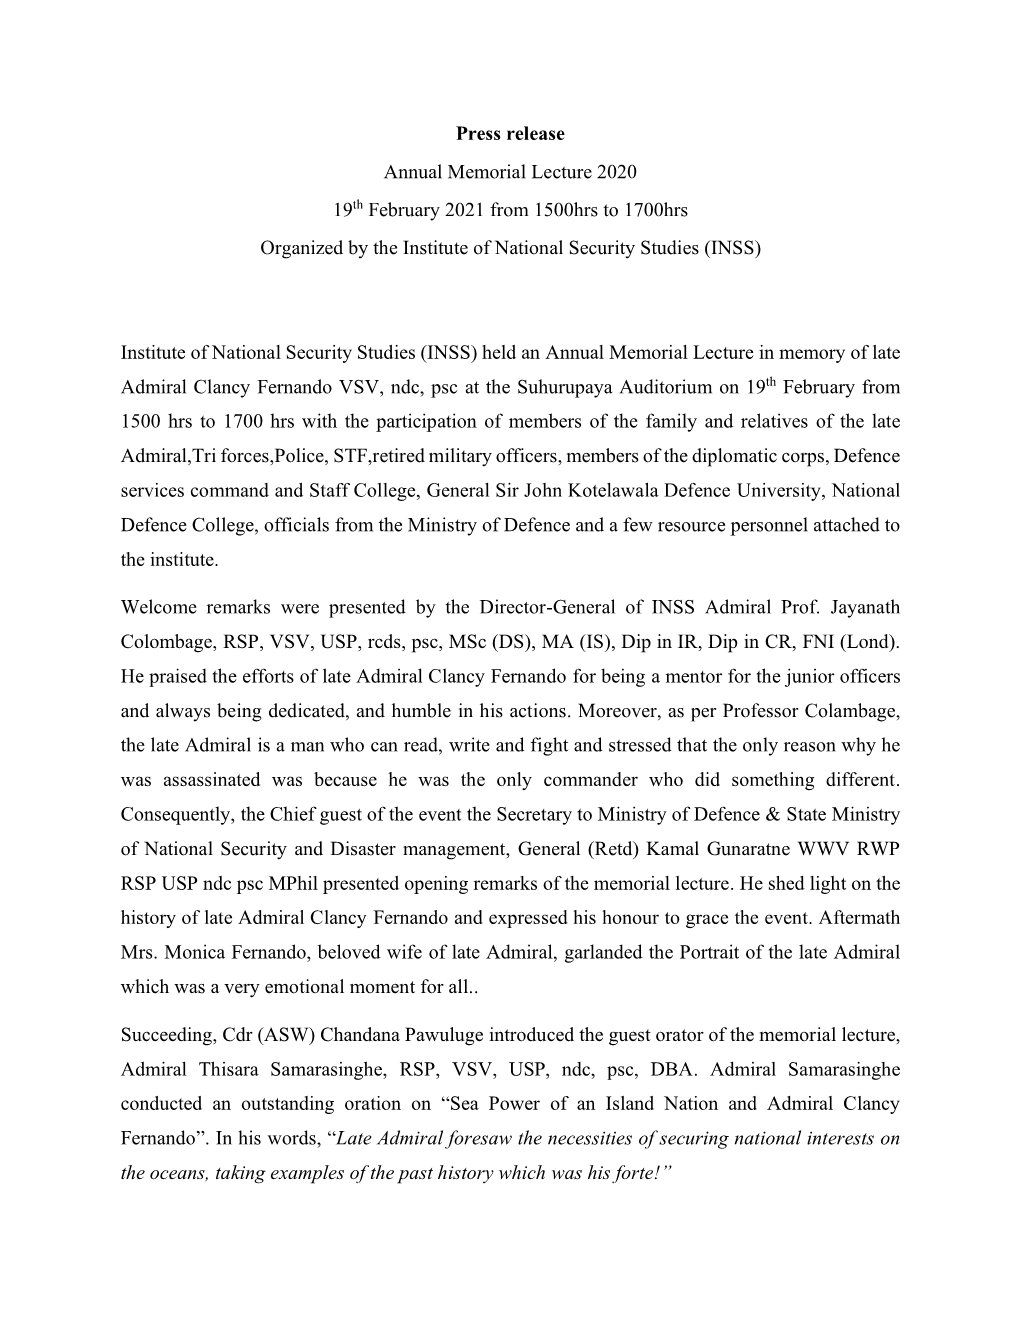 Press Release Annual Memorial Lecture 2020 19Th February 2021 from 1500Hrs to 1700Hrs Organized by the Institute of National Security Studies (INSS)